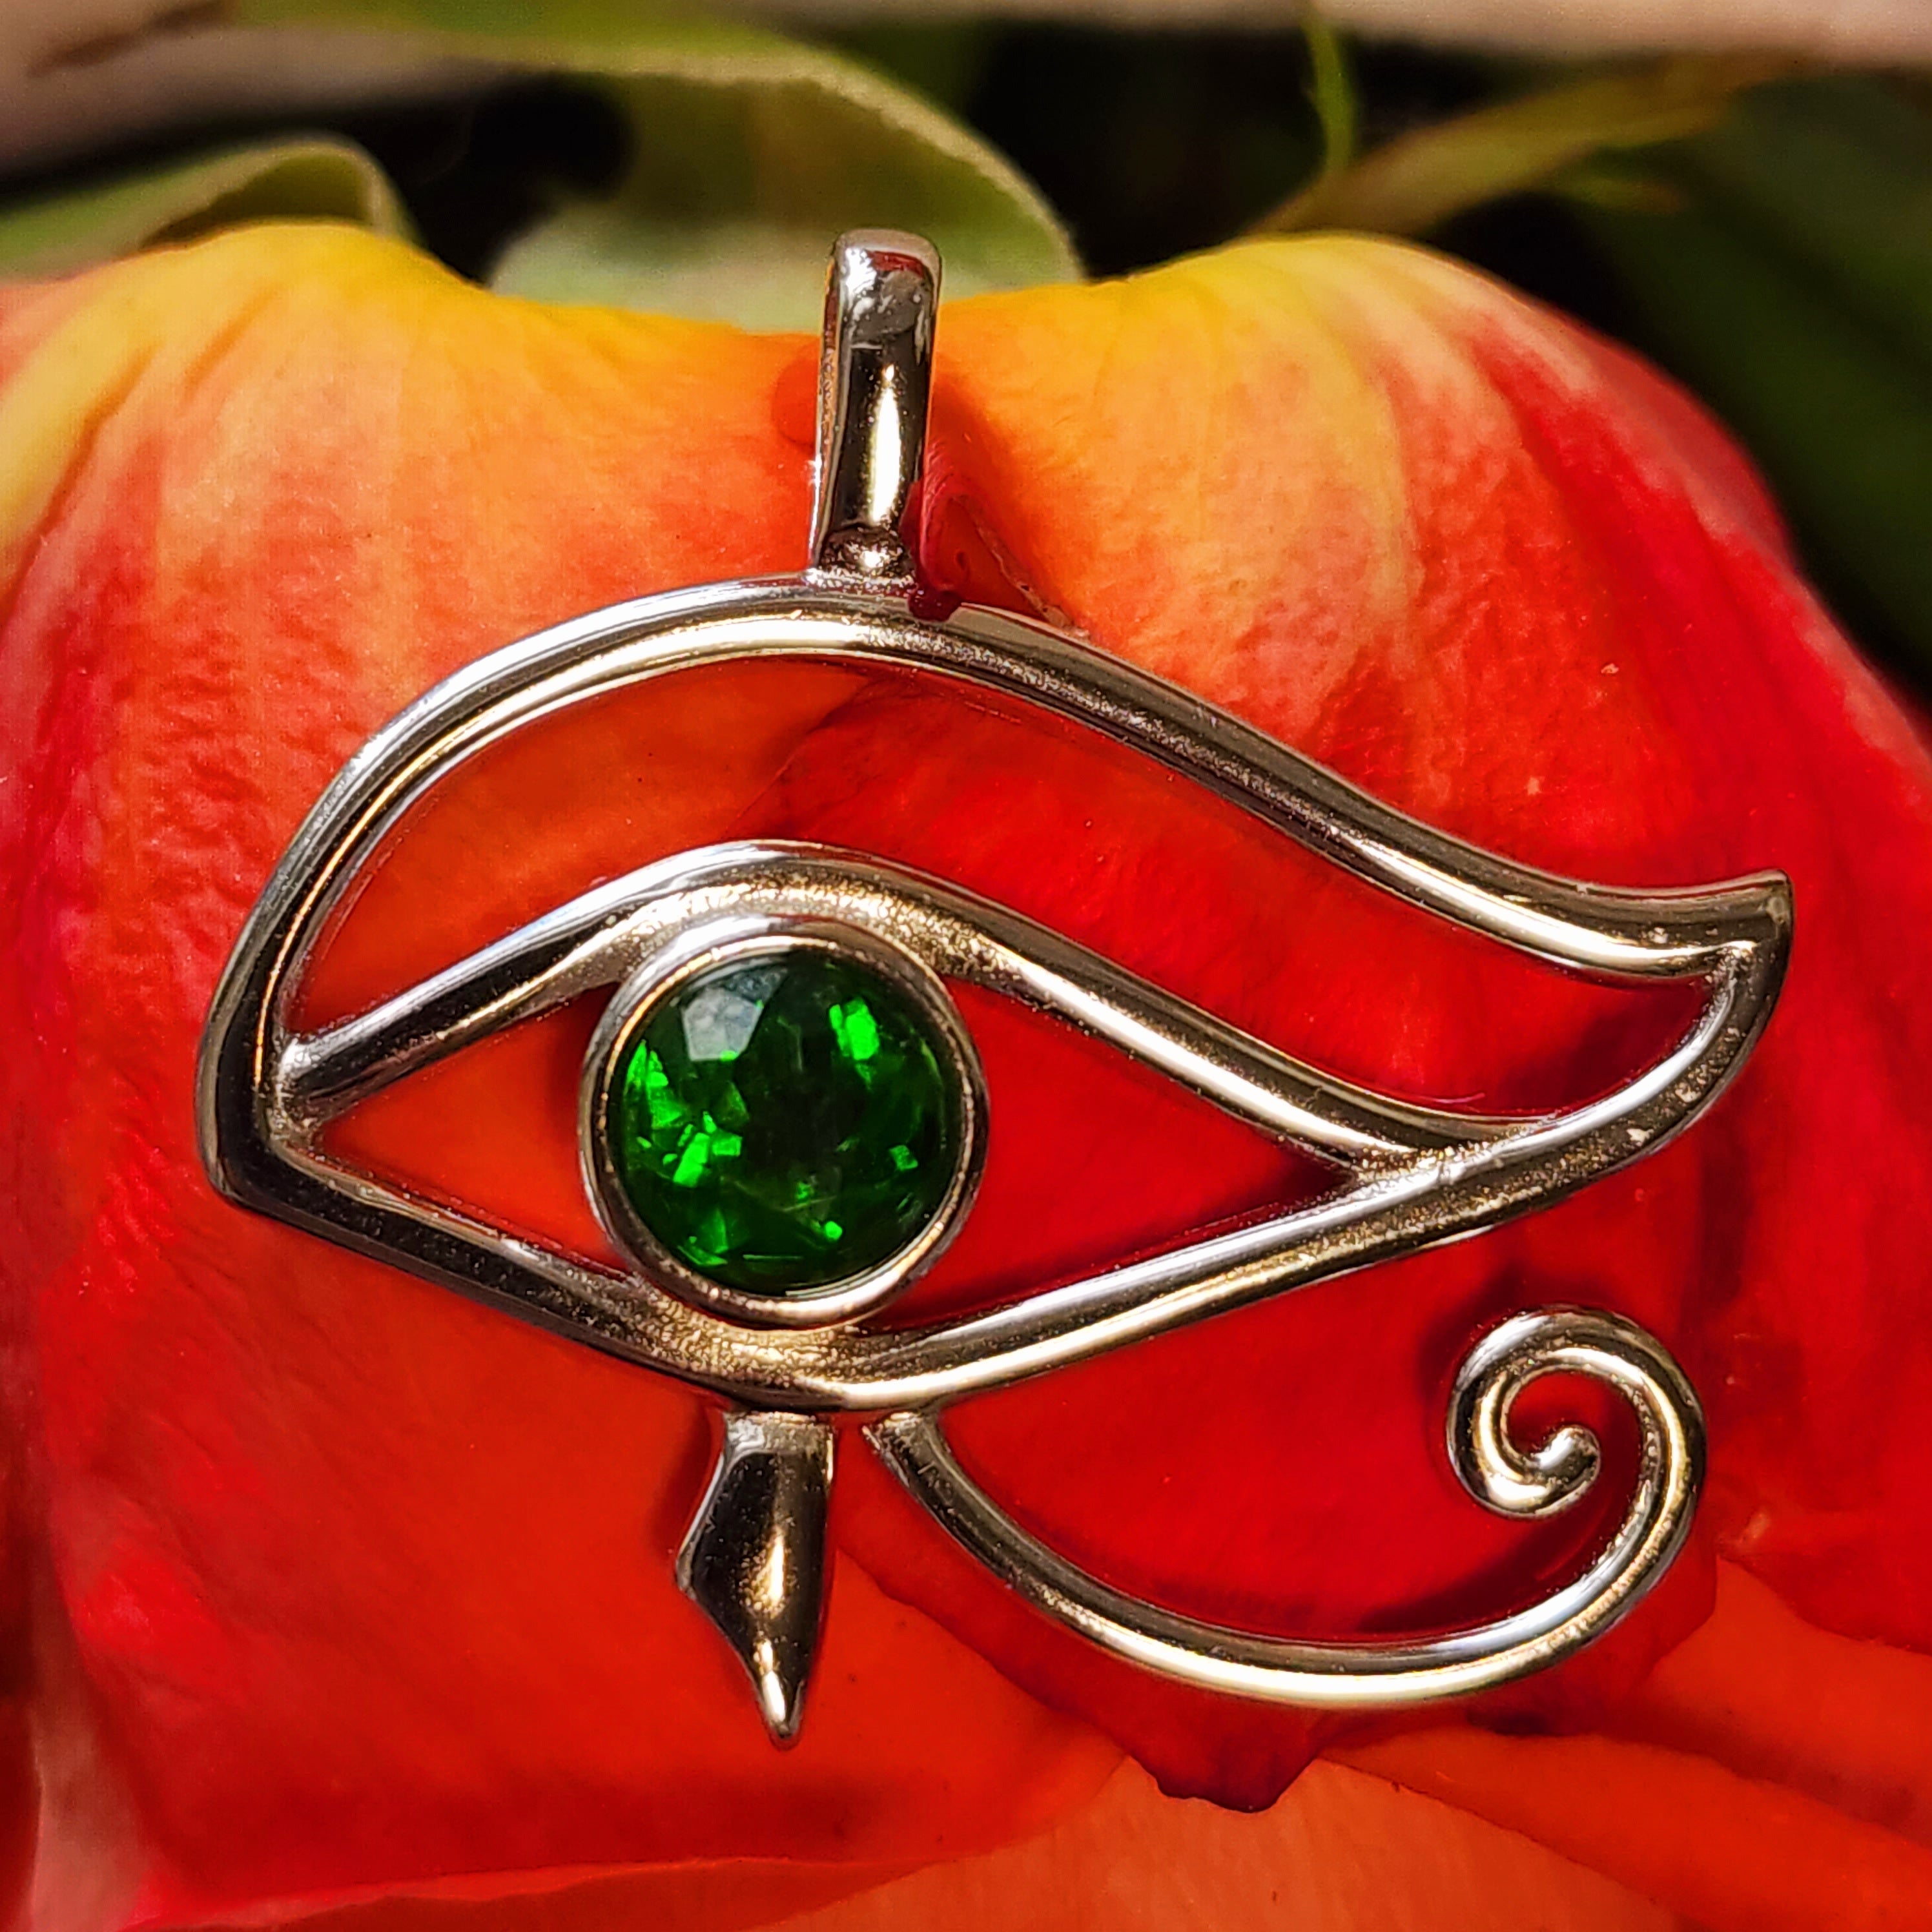 Chrome Diopside Eye of Horus Amulet Pendant .925 Silver for Abundance, Chakra Alignment and Overall Health